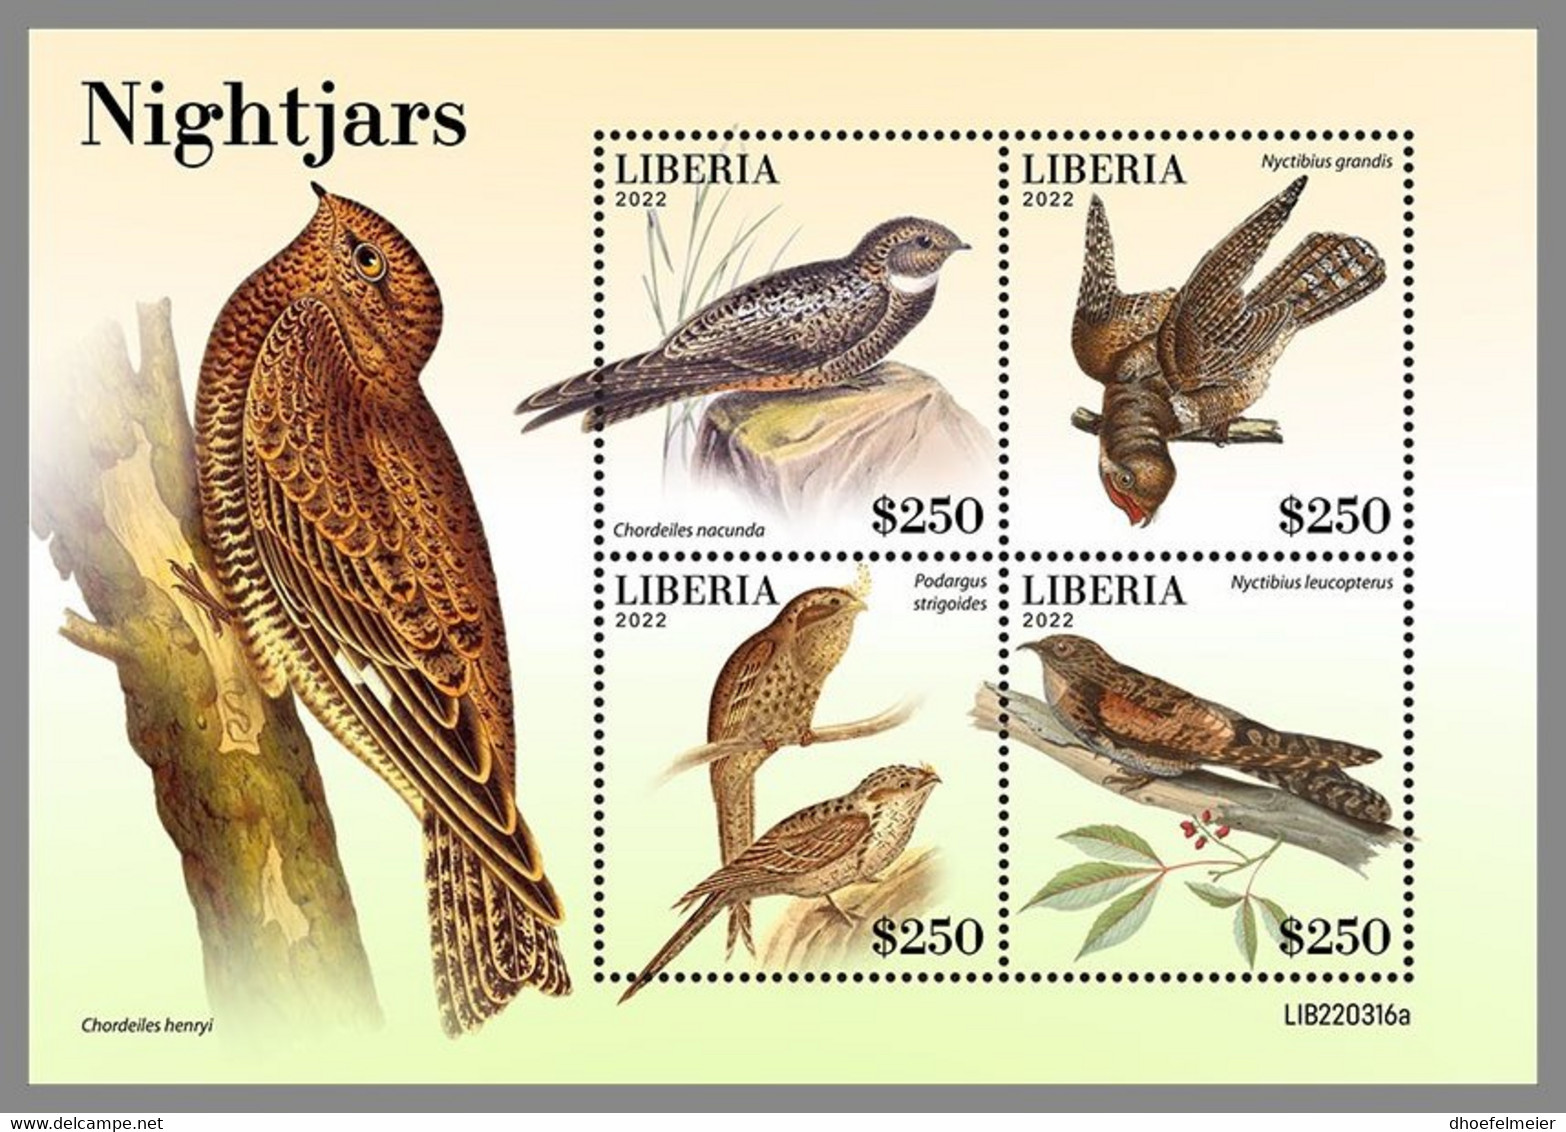 LIBERIA 2022 MNH Nightjars Nachtschwalben Engoulevents M/S - OFFICIAL ISSUE - DHQ2249 - Hirondelles